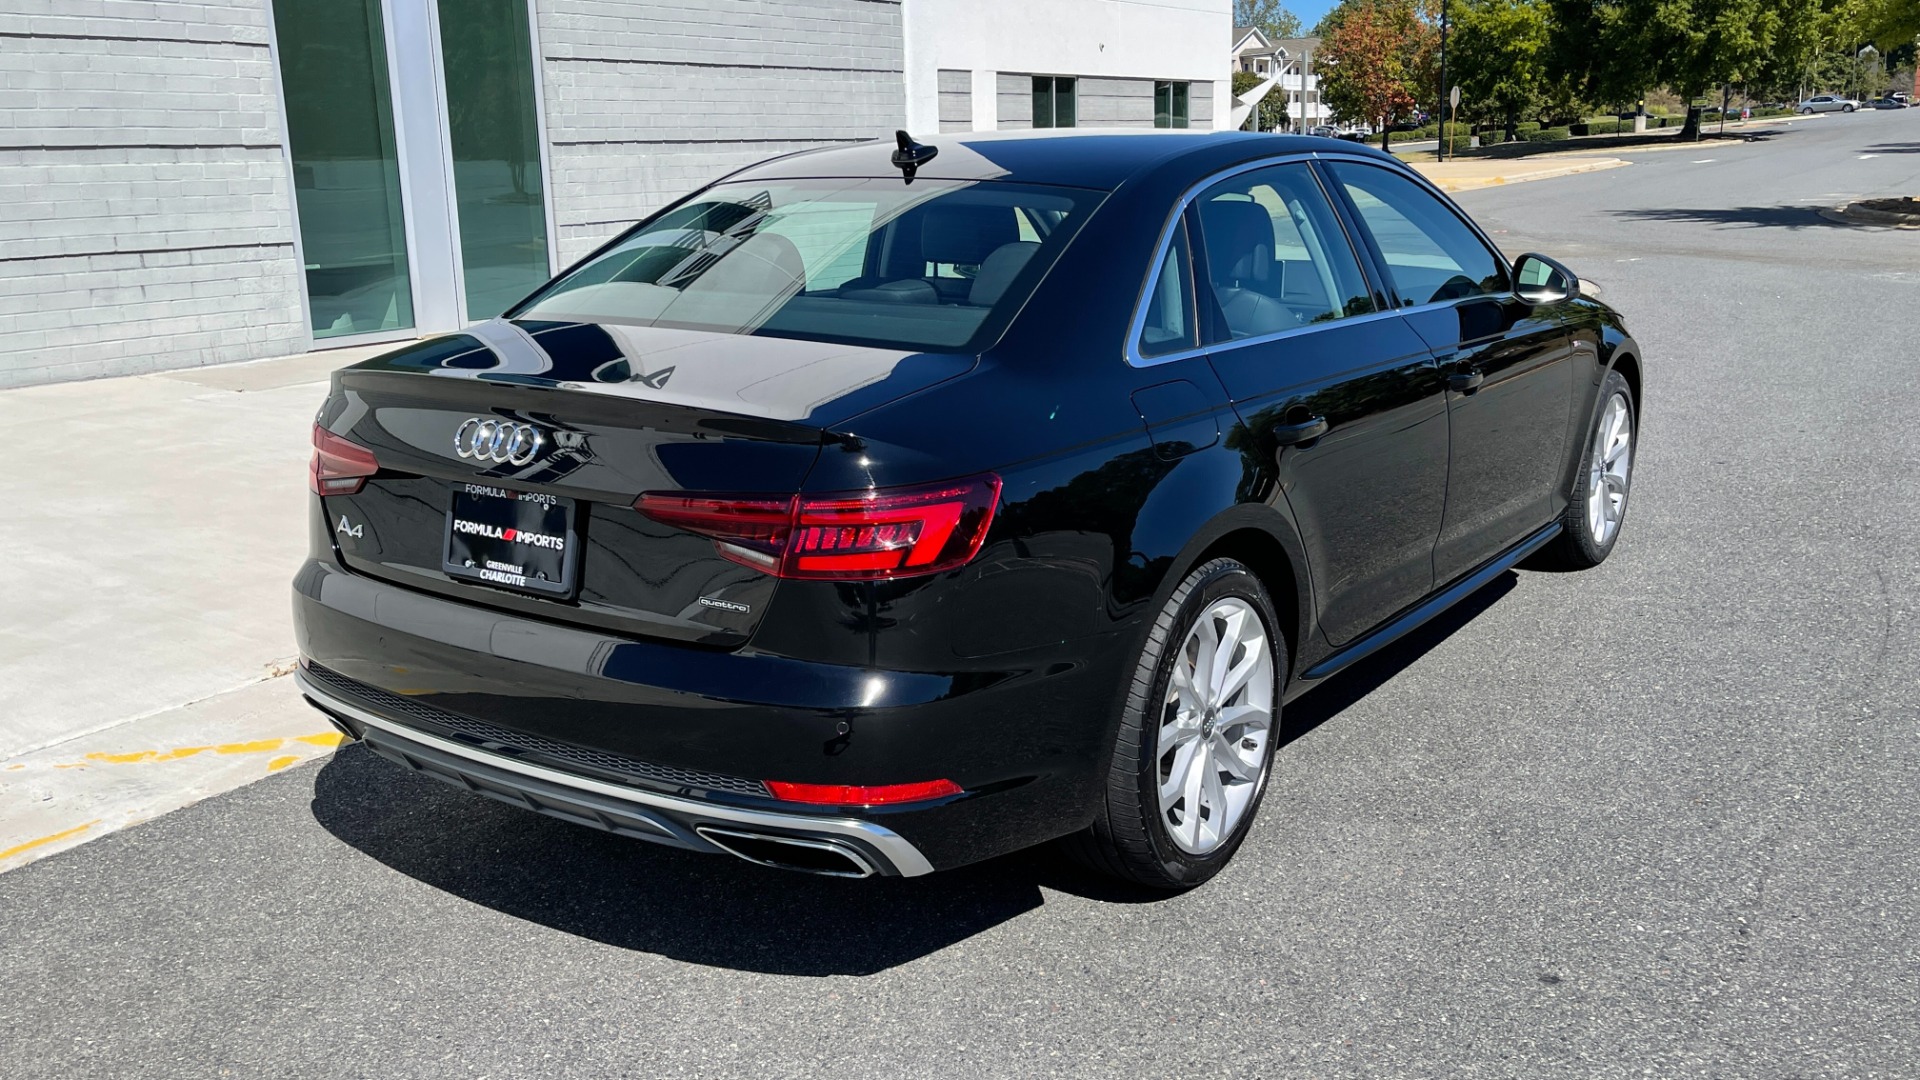 Used 2019 Audi A4 PREMIUM PLUS / COLD WEATHER / AUDI BEAM RINGS / LEATHER / QUATTRO AWD for sale $29,995 at Formula Imports in Charlotte NC 28227 4